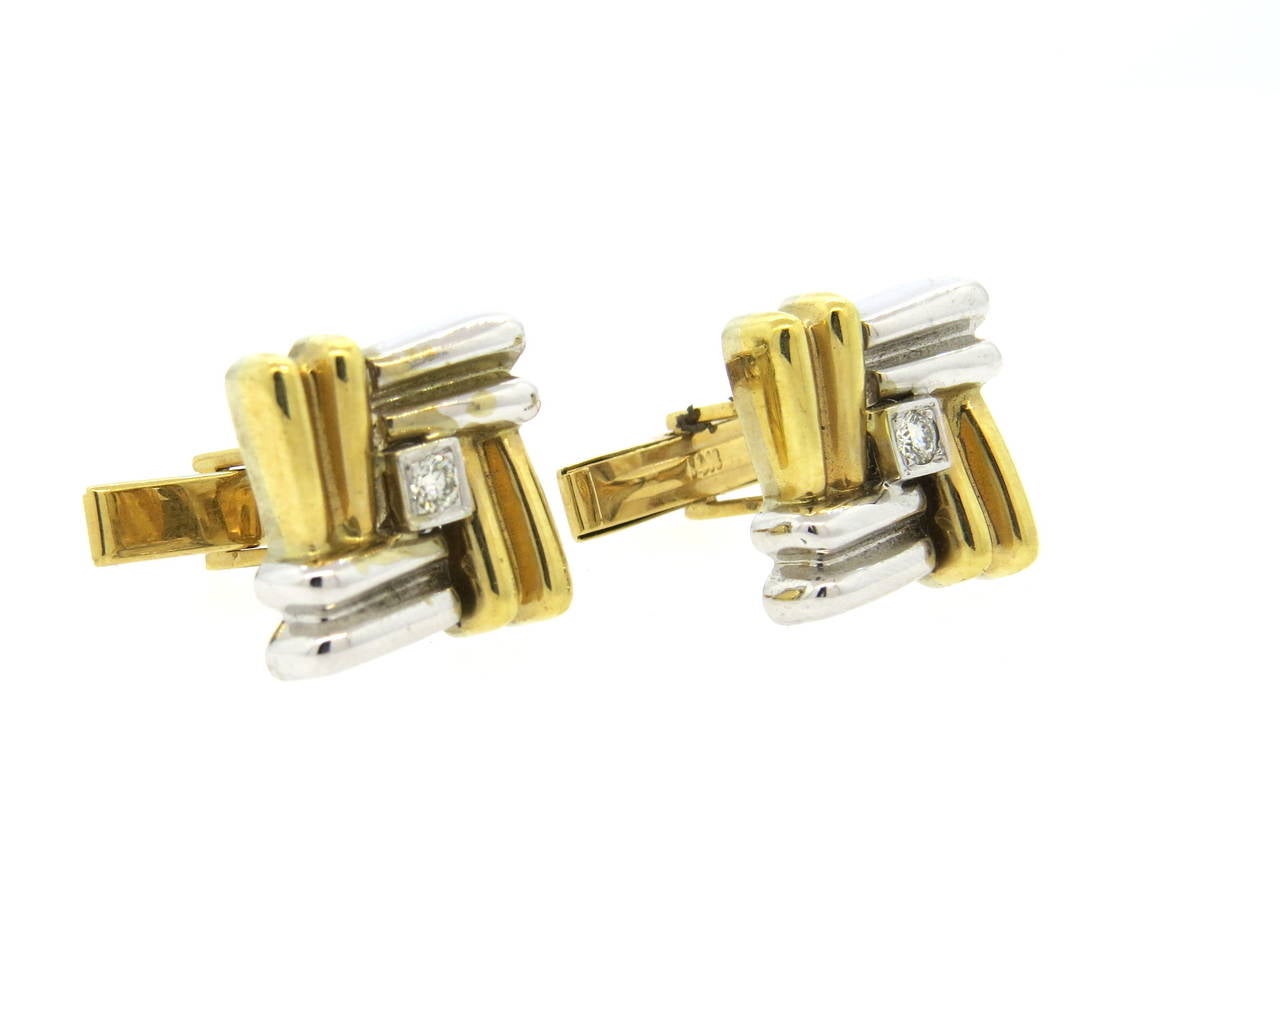 Classic 14k two tone gold cufflinks, each set with 0.05ct diamond in the center. Cufflinks measure 16mm x 16mm. Weight - 19.4 grams